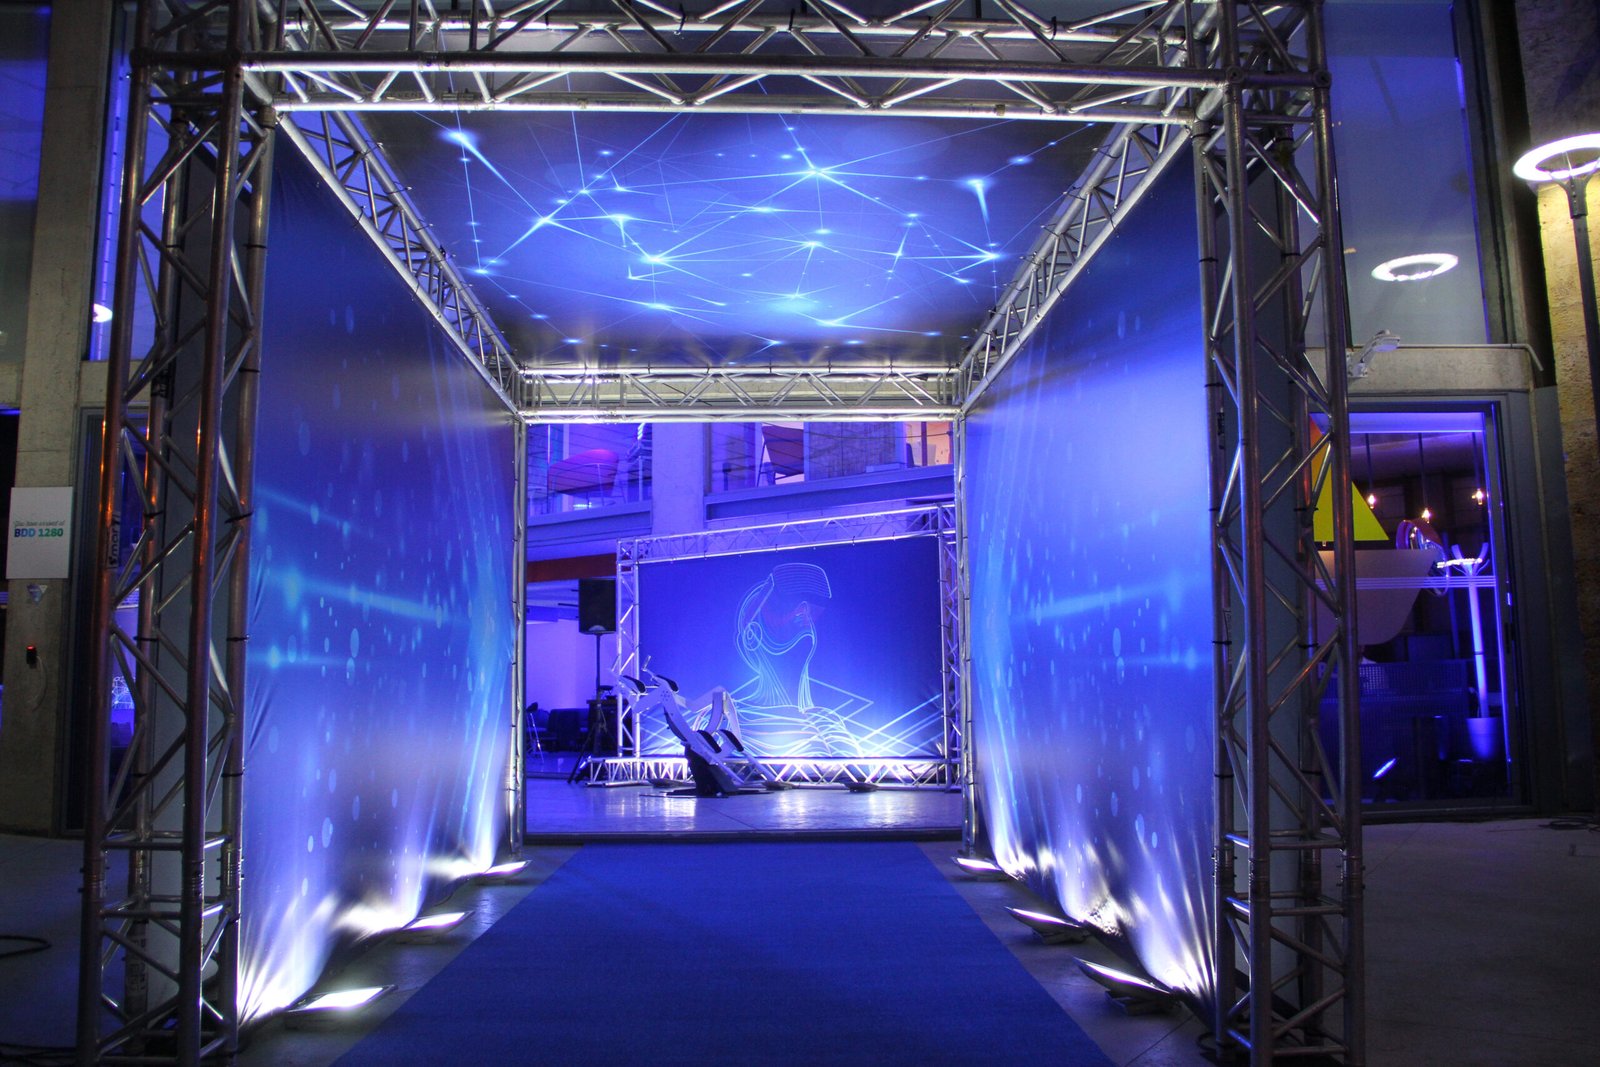 Truss tunnel structure with digital branding for a launch event